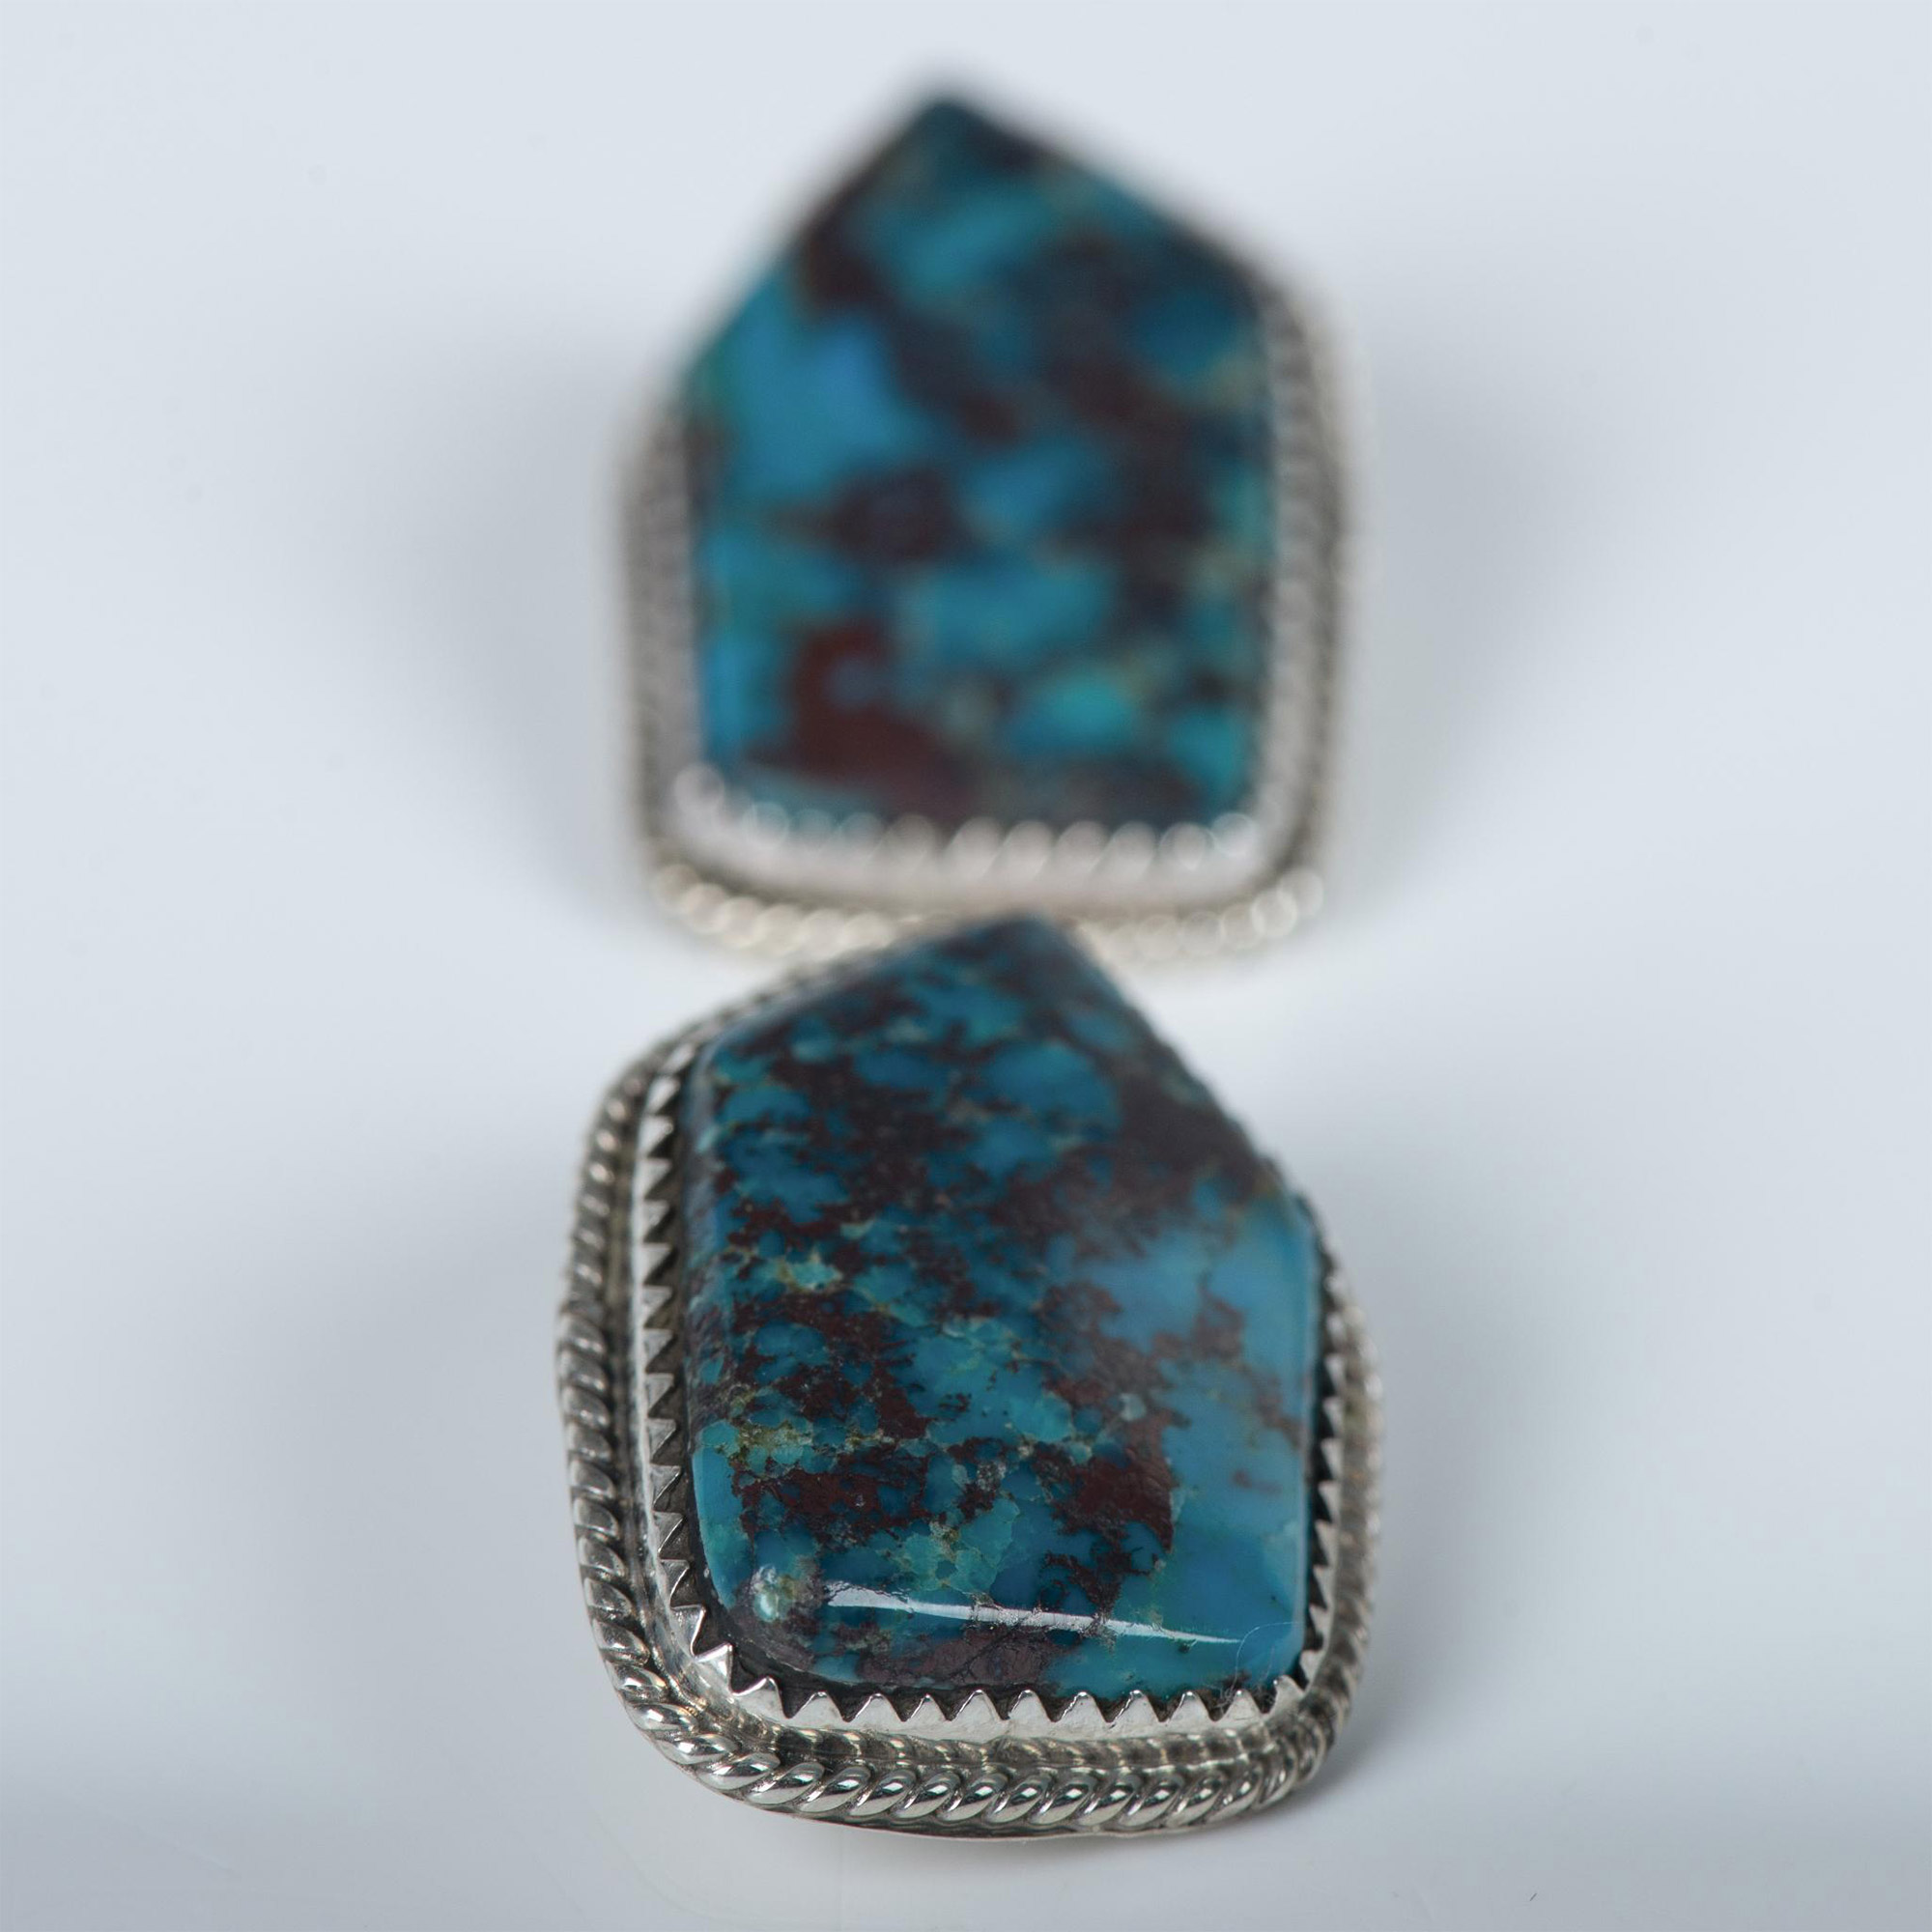 Native American Sterling Silver & Turquoise Clip-On Earrings - Image 4 of 5